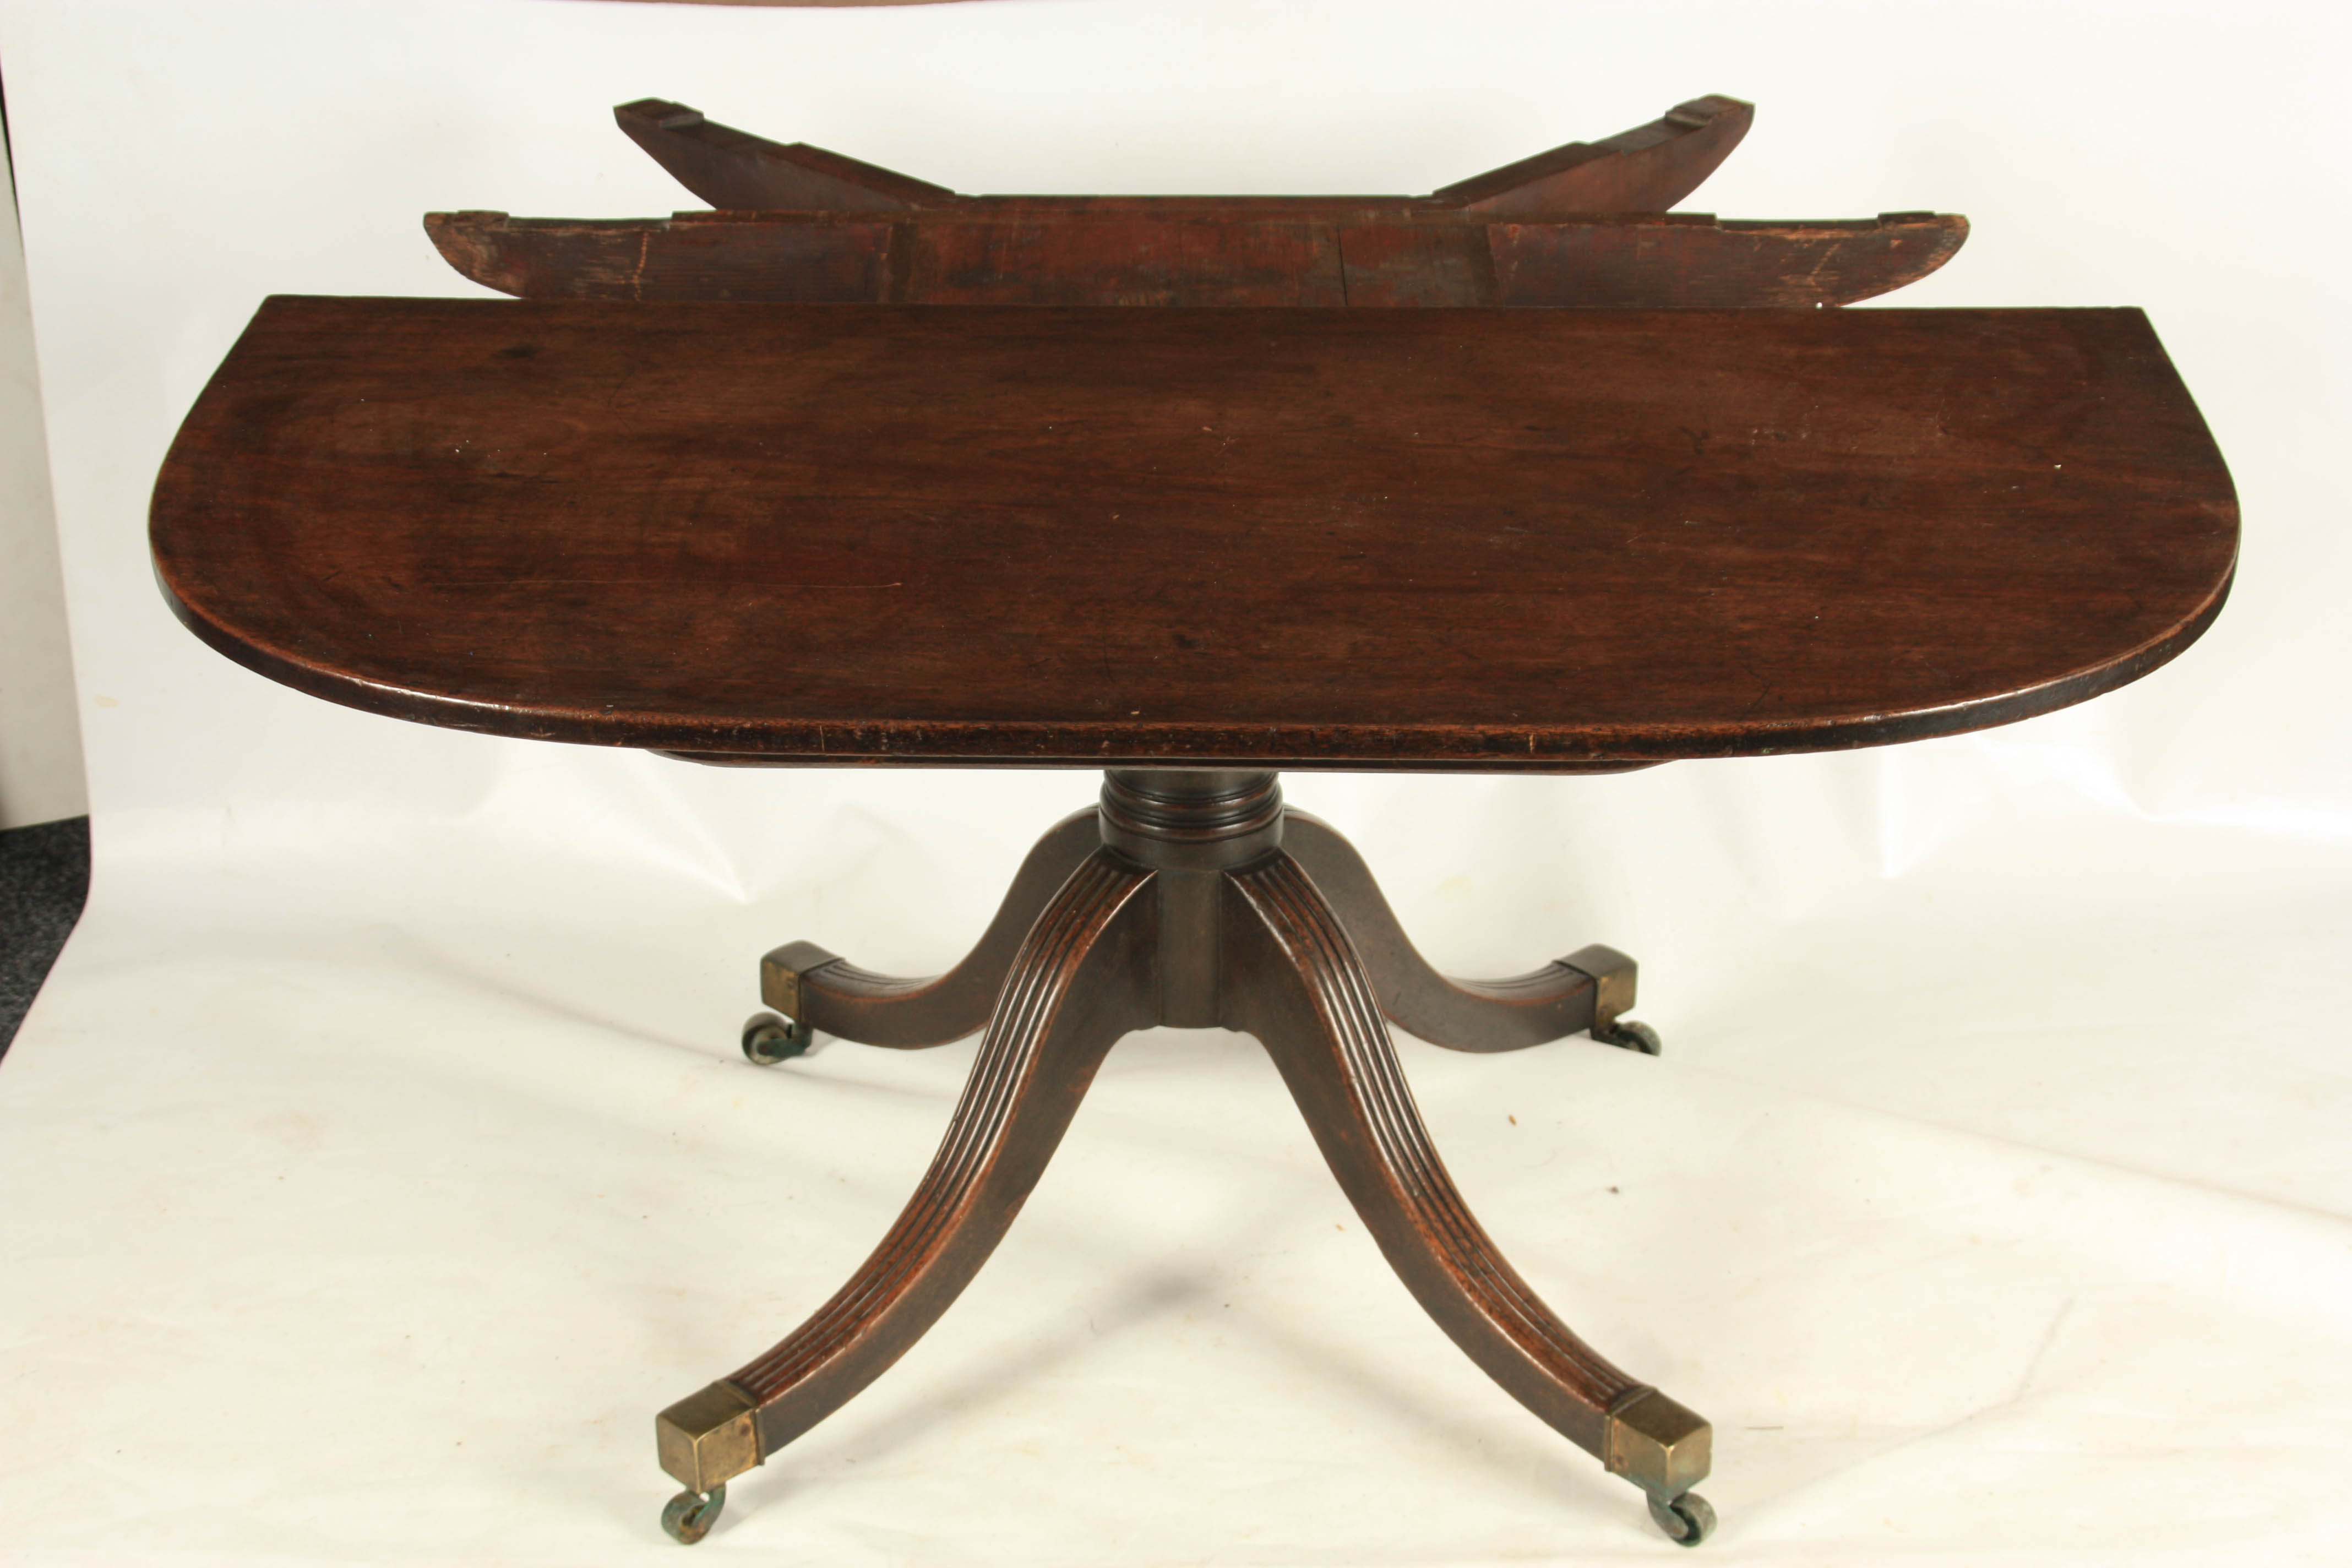 AN UNUSUAL MID 18TH CENTURY DROP LEAF PEDESTAL DINING TABLE with two-section top one being - Image 4 of 12